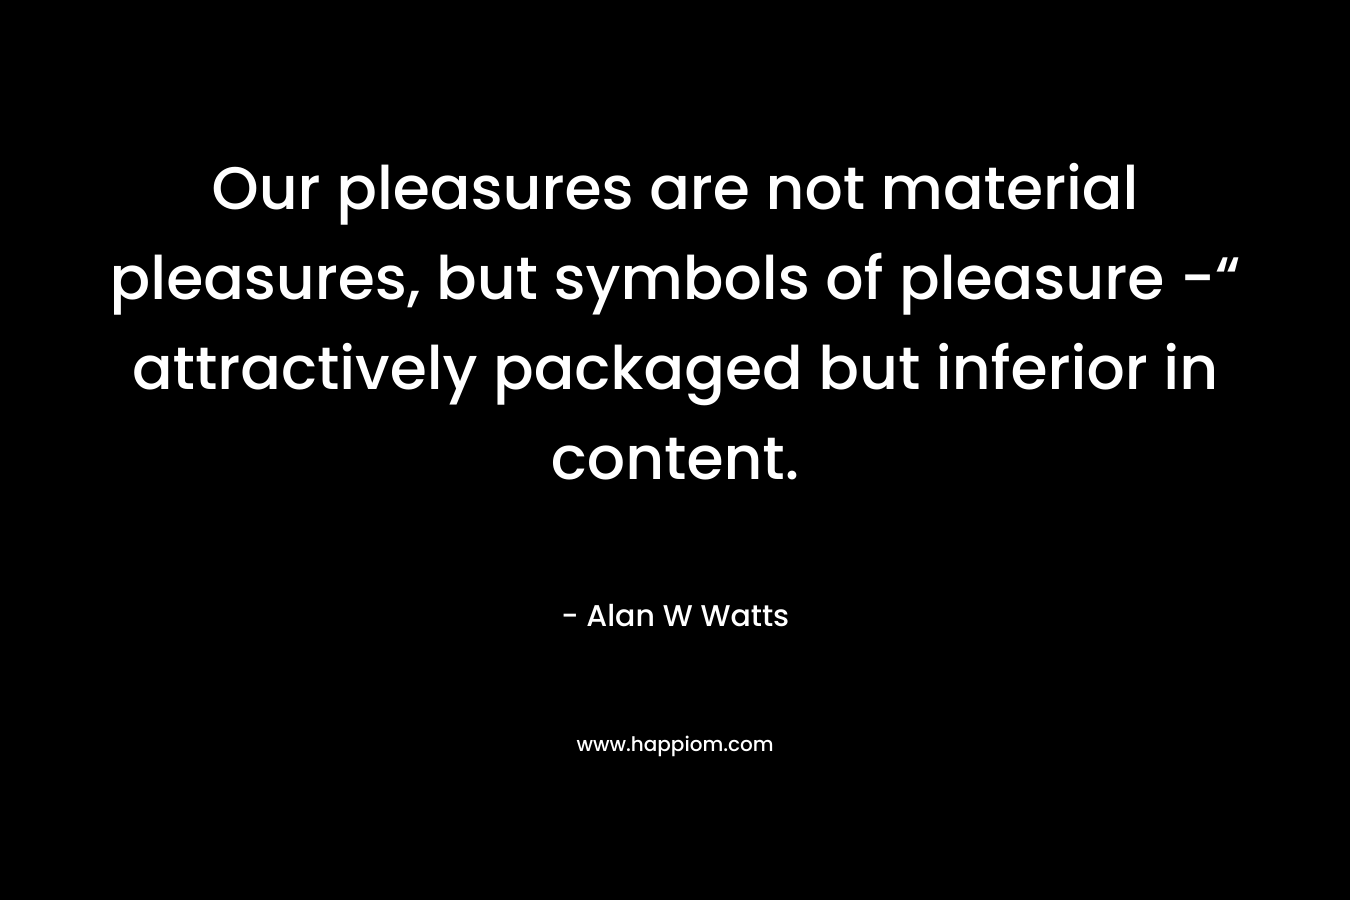 Our pleasures are not material pleasures, but symbols of pleasure -“ attractively packaged but inferior in content. – Alan W Watts